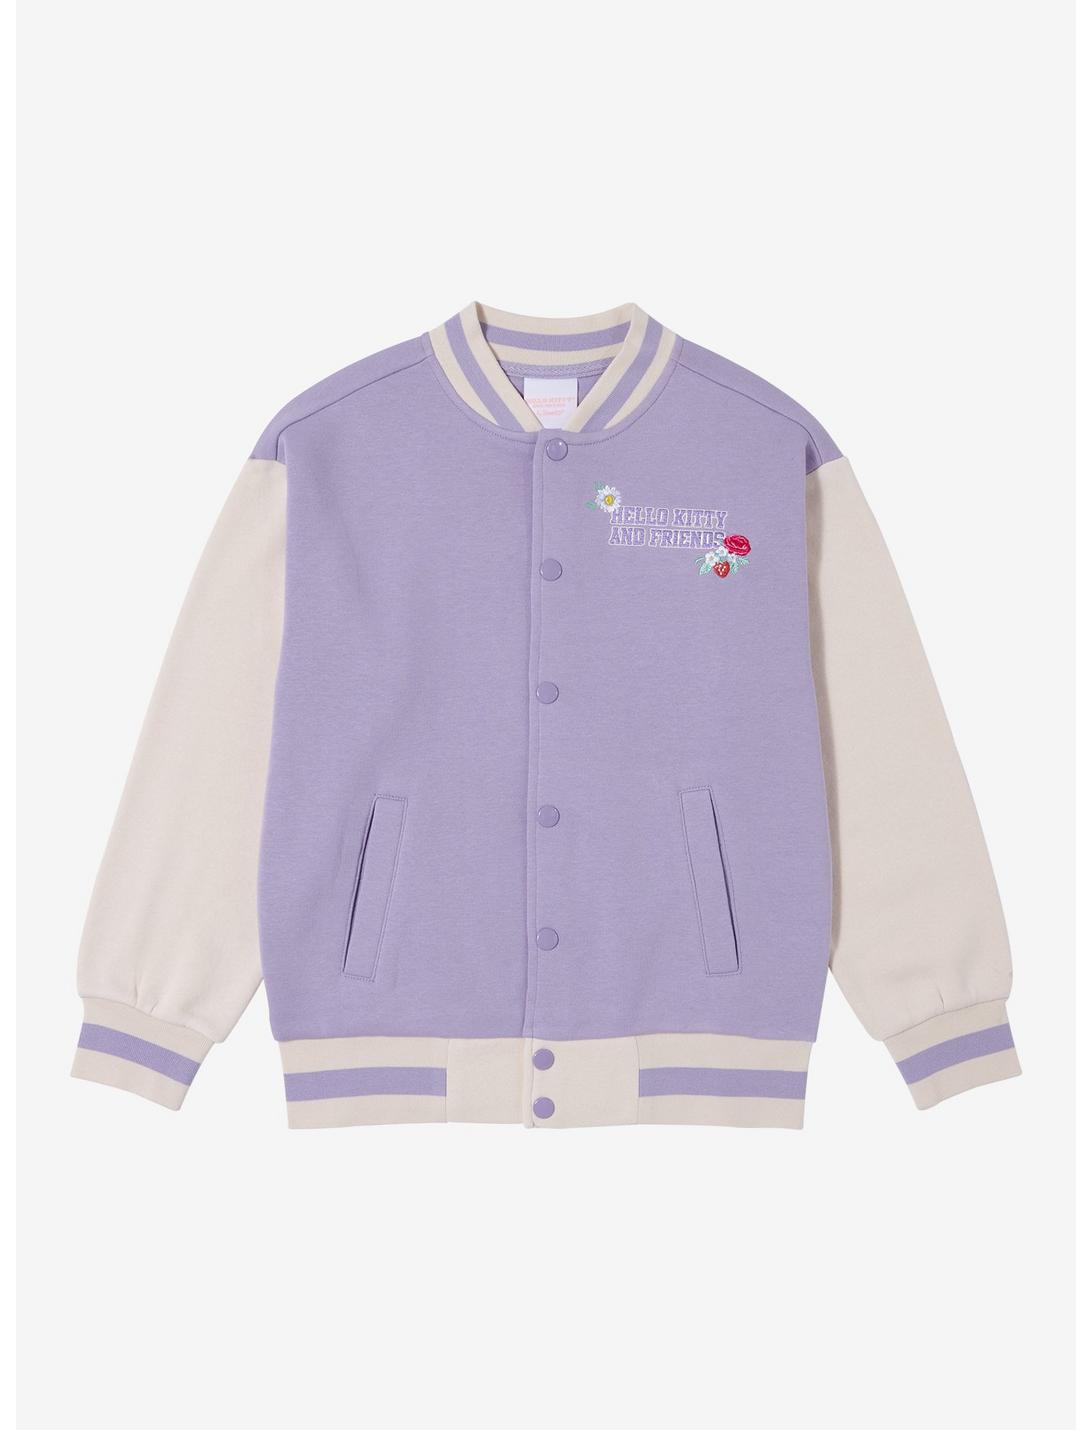 Sanrio Hello Kitty and Friends Floral Youth Varsity Jacket - BoxLunch Exclusive, LIGHT PURPLE, hi-res